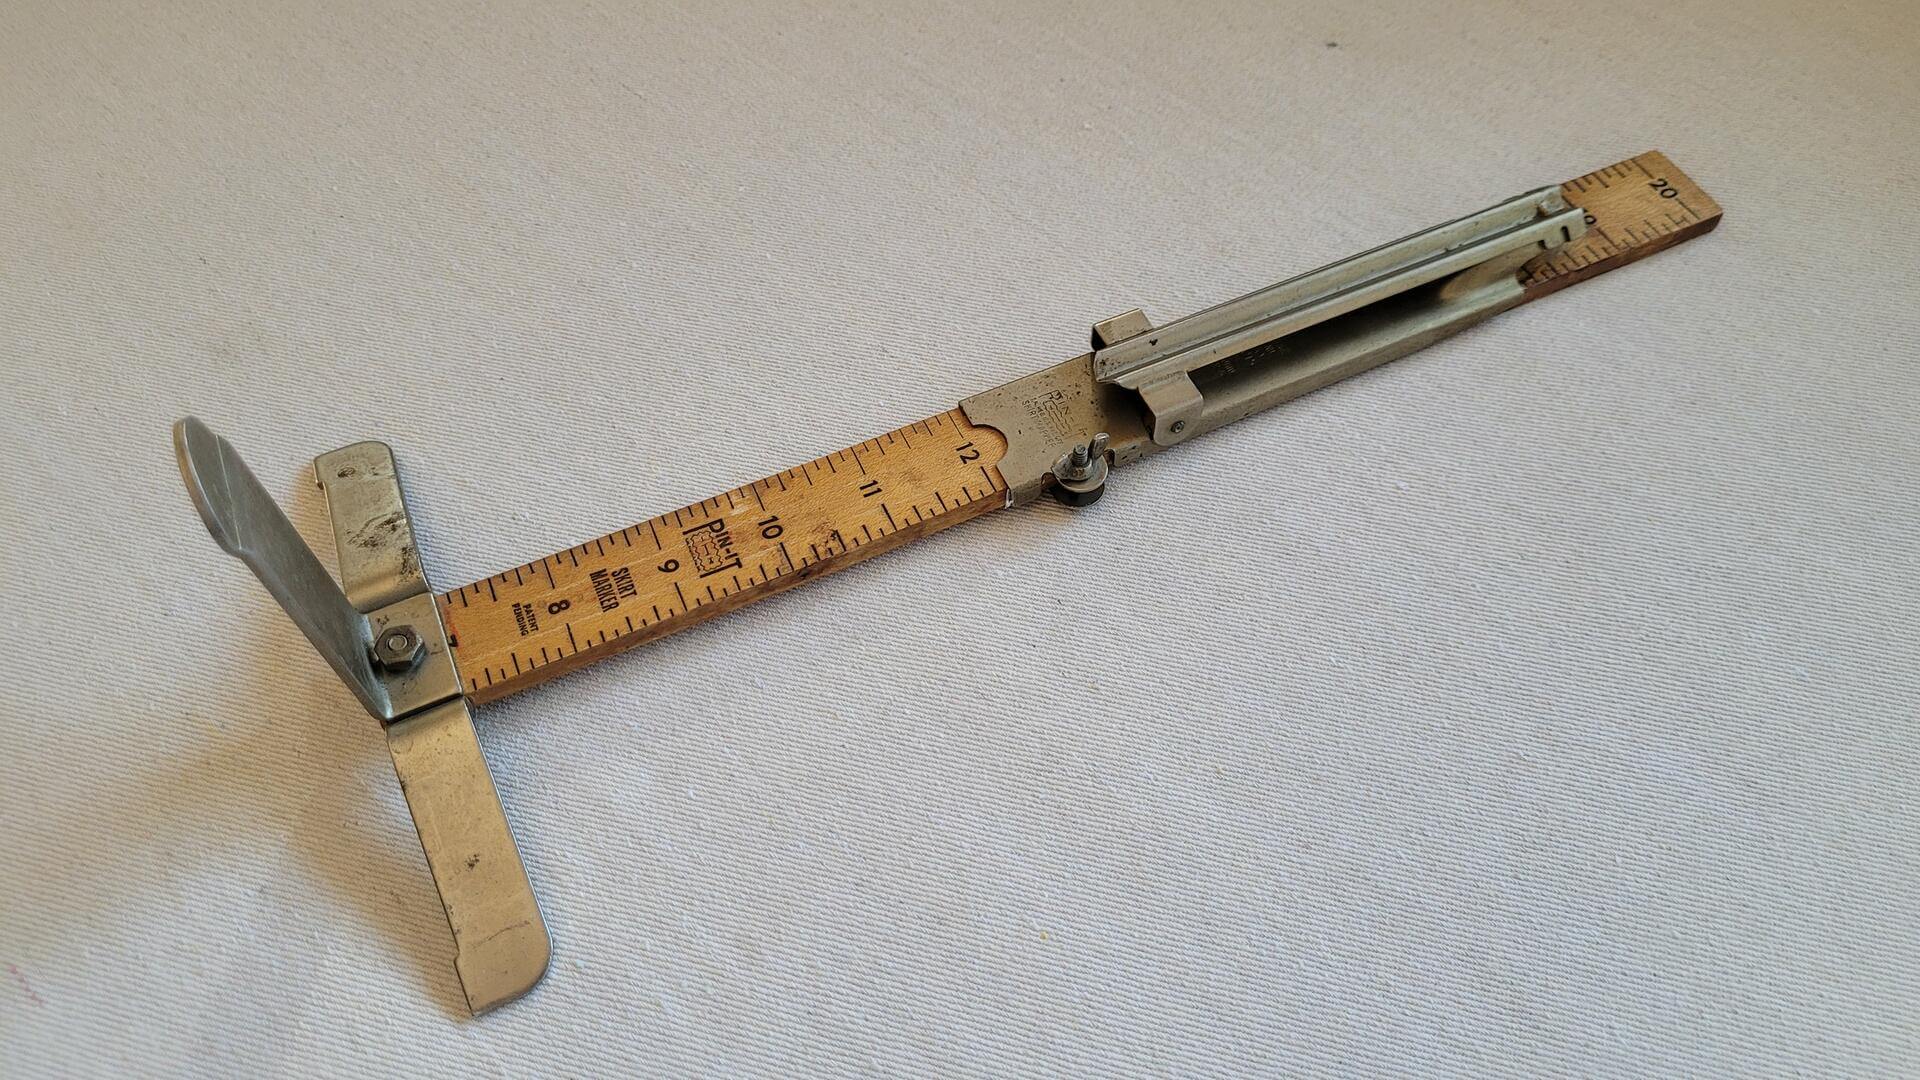 Pin It skirt marker hem line measuring tool with adjustable mount by Orco Products Inc from Dayton Ohio. Vintage MCM made in USA collectible sewing tools and accessories